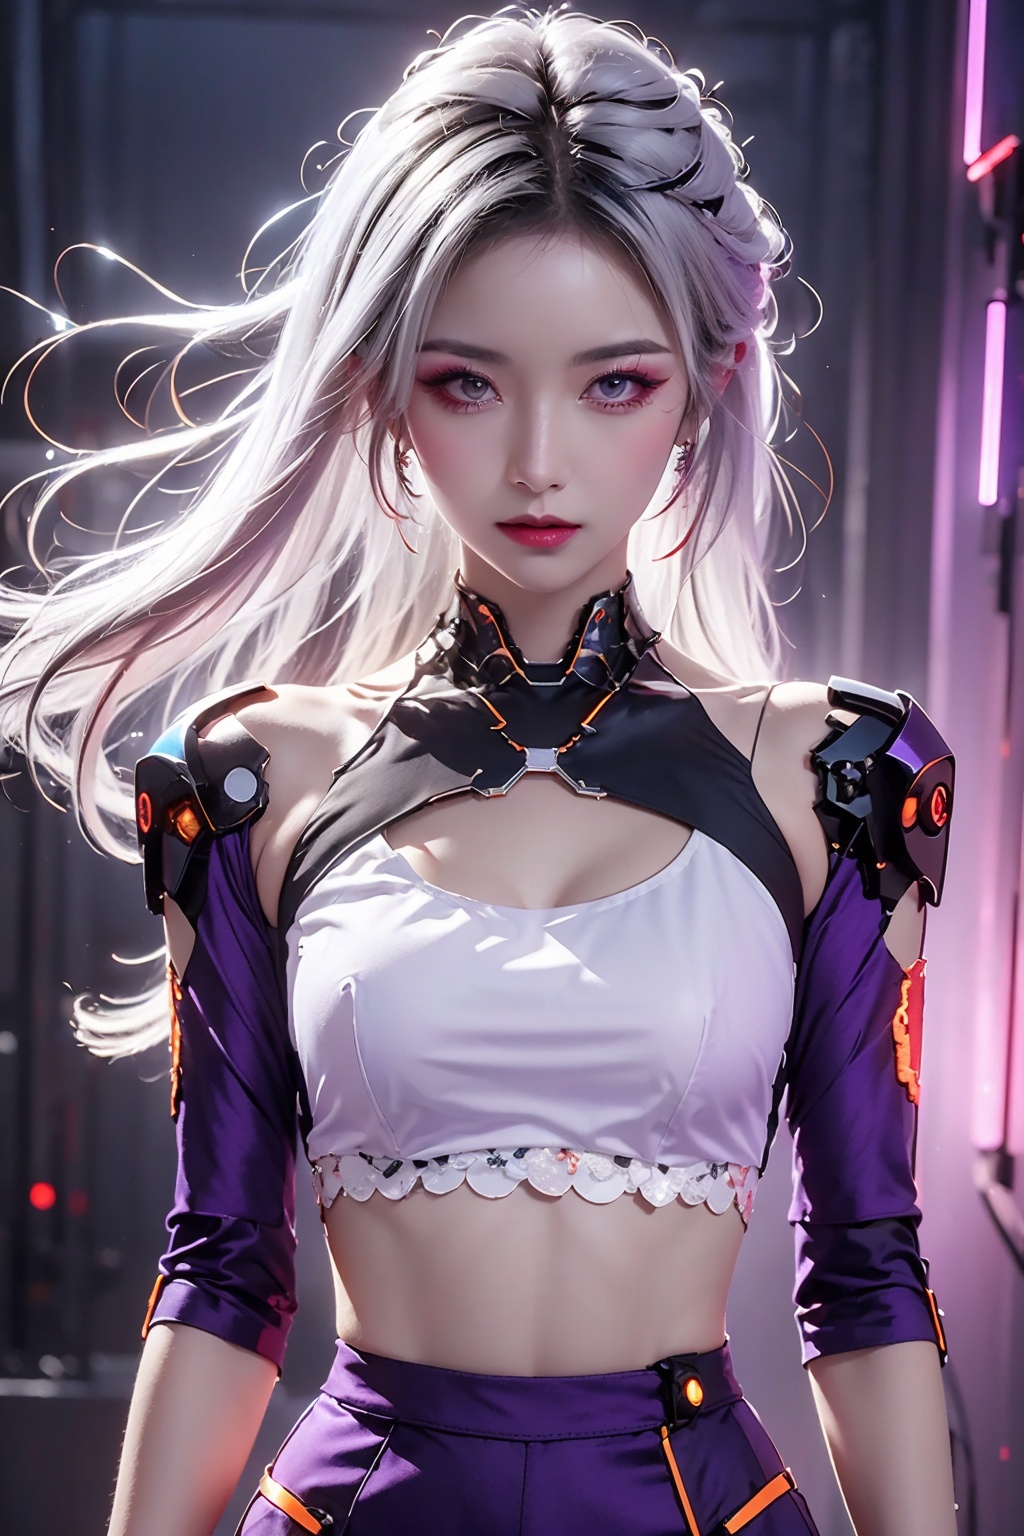  best quality, 8k, concept art, Thought-Provoking Aunt of Blood, intricate details, JoJo pose, Straps, Rings, Gloves, Low shutter, (Violet power aura:1.2), most beautiful artwork in the world, White hair,aesthetics, atmosphere, (neon,cyborg:1.1), fantasy, depth of field